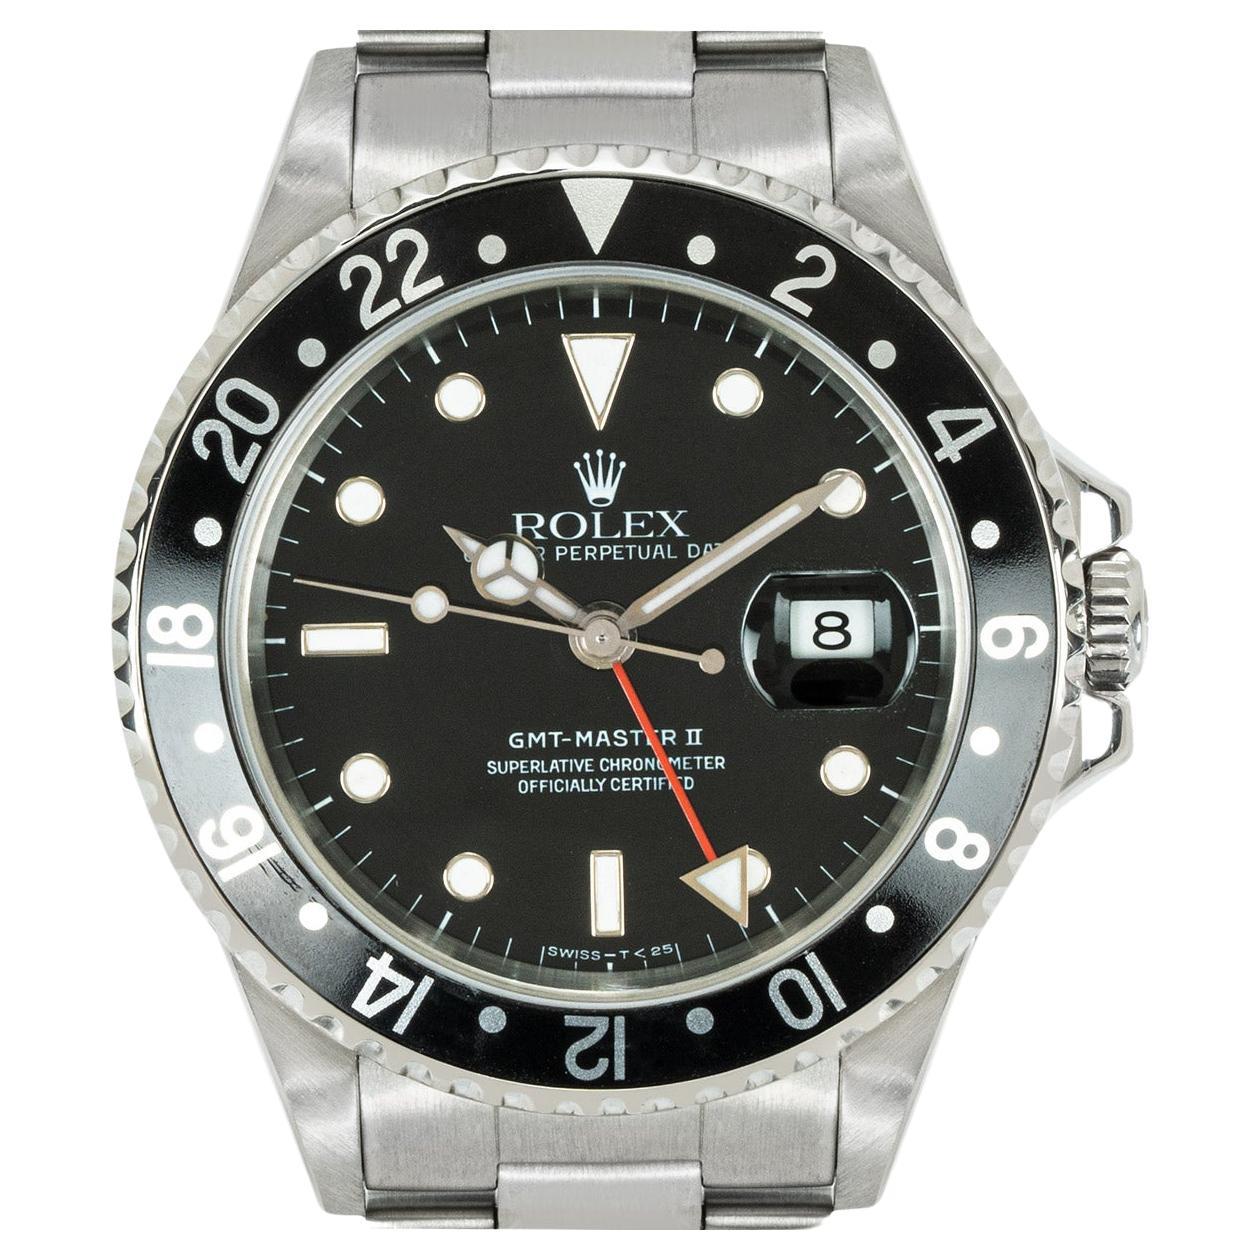 A stainless steel GMT-Master II by Rolex, featuring a black dial with a date aperture and a red second-time zone hand. The bidirectional rotatable bezel features a 24-hour display. Equipped with an Oyster bracelet set with a steel deployant clasp.